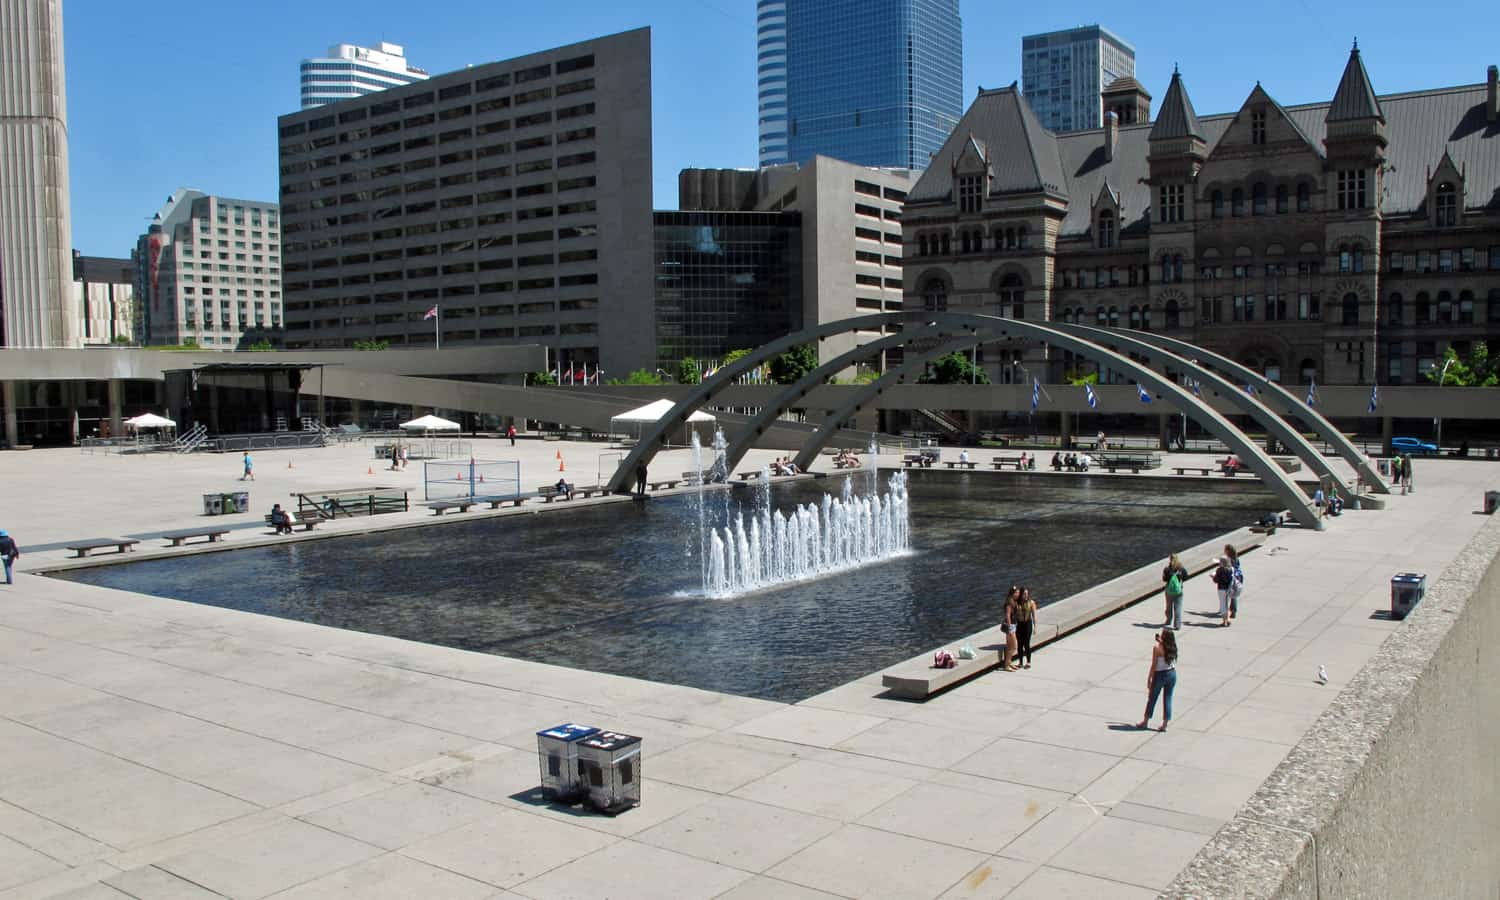 Looking across Nathan Phillips Square with the former City Hall in the background